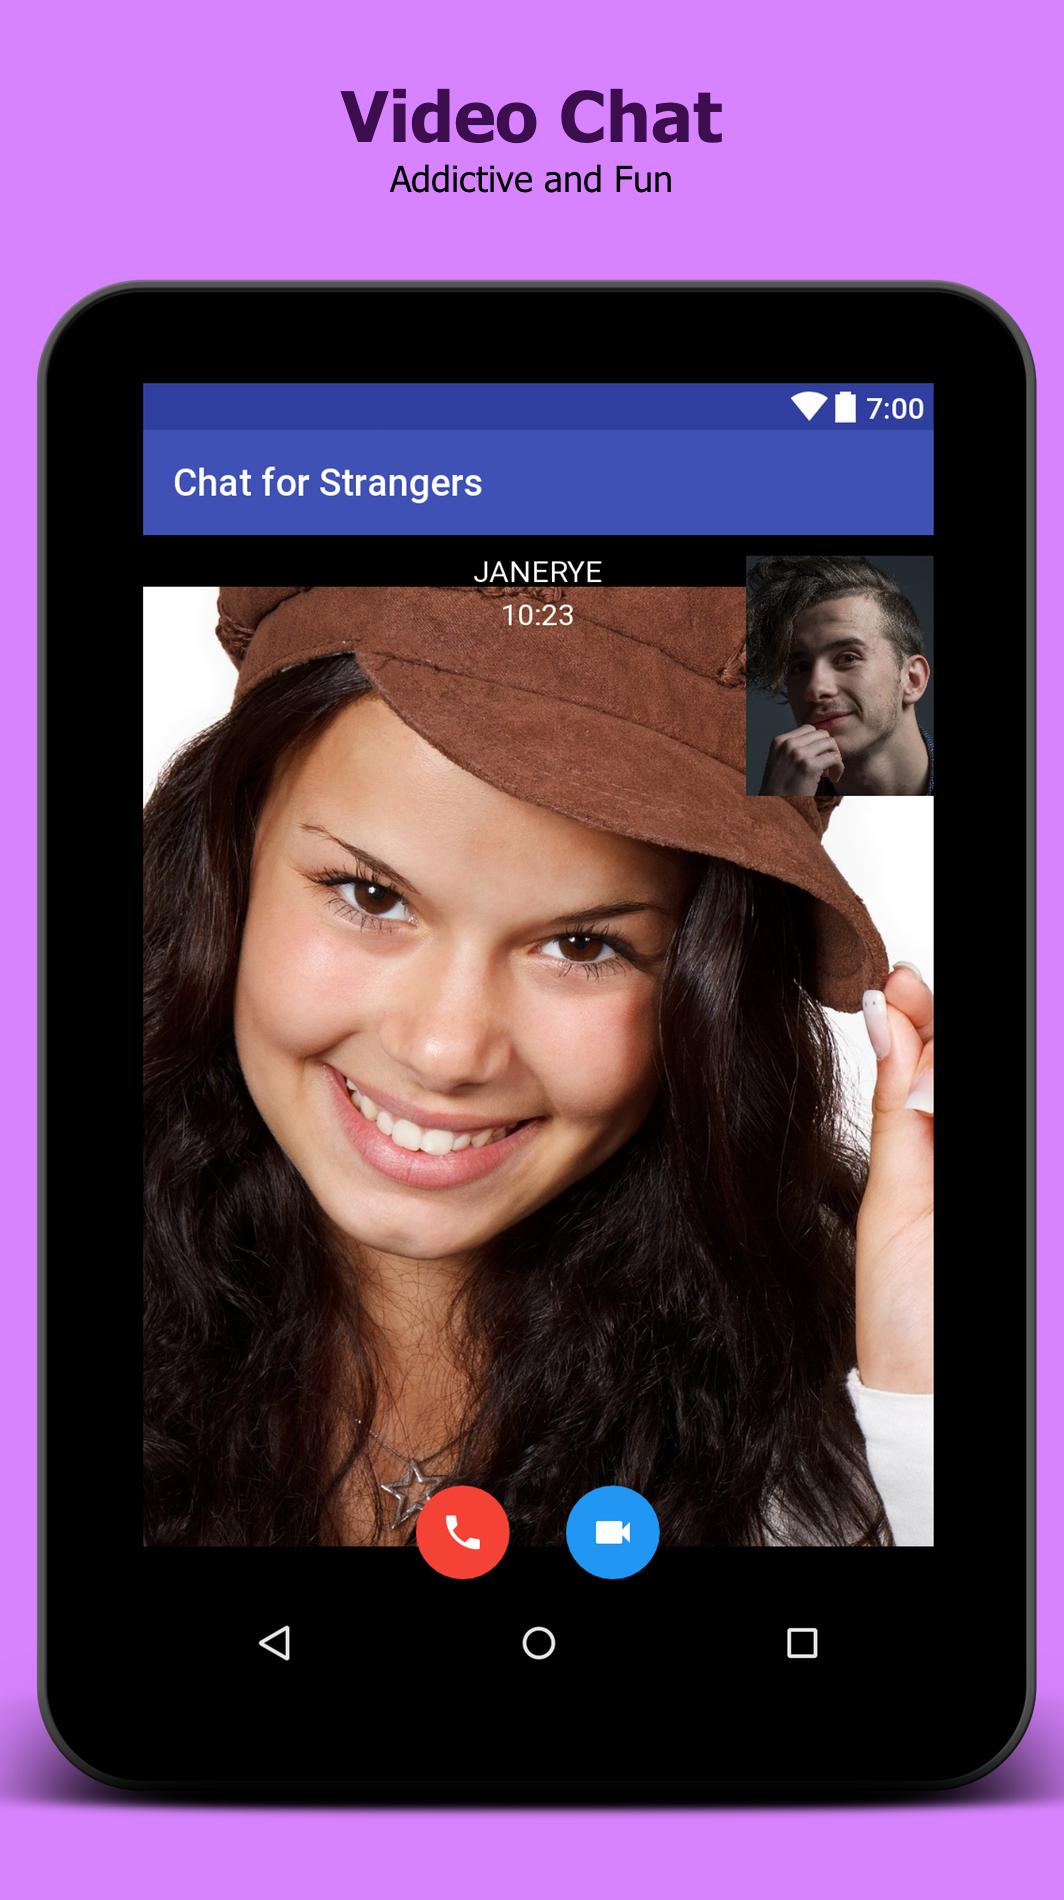 Chat For Strangers - Video Chat for Android - APK Download.